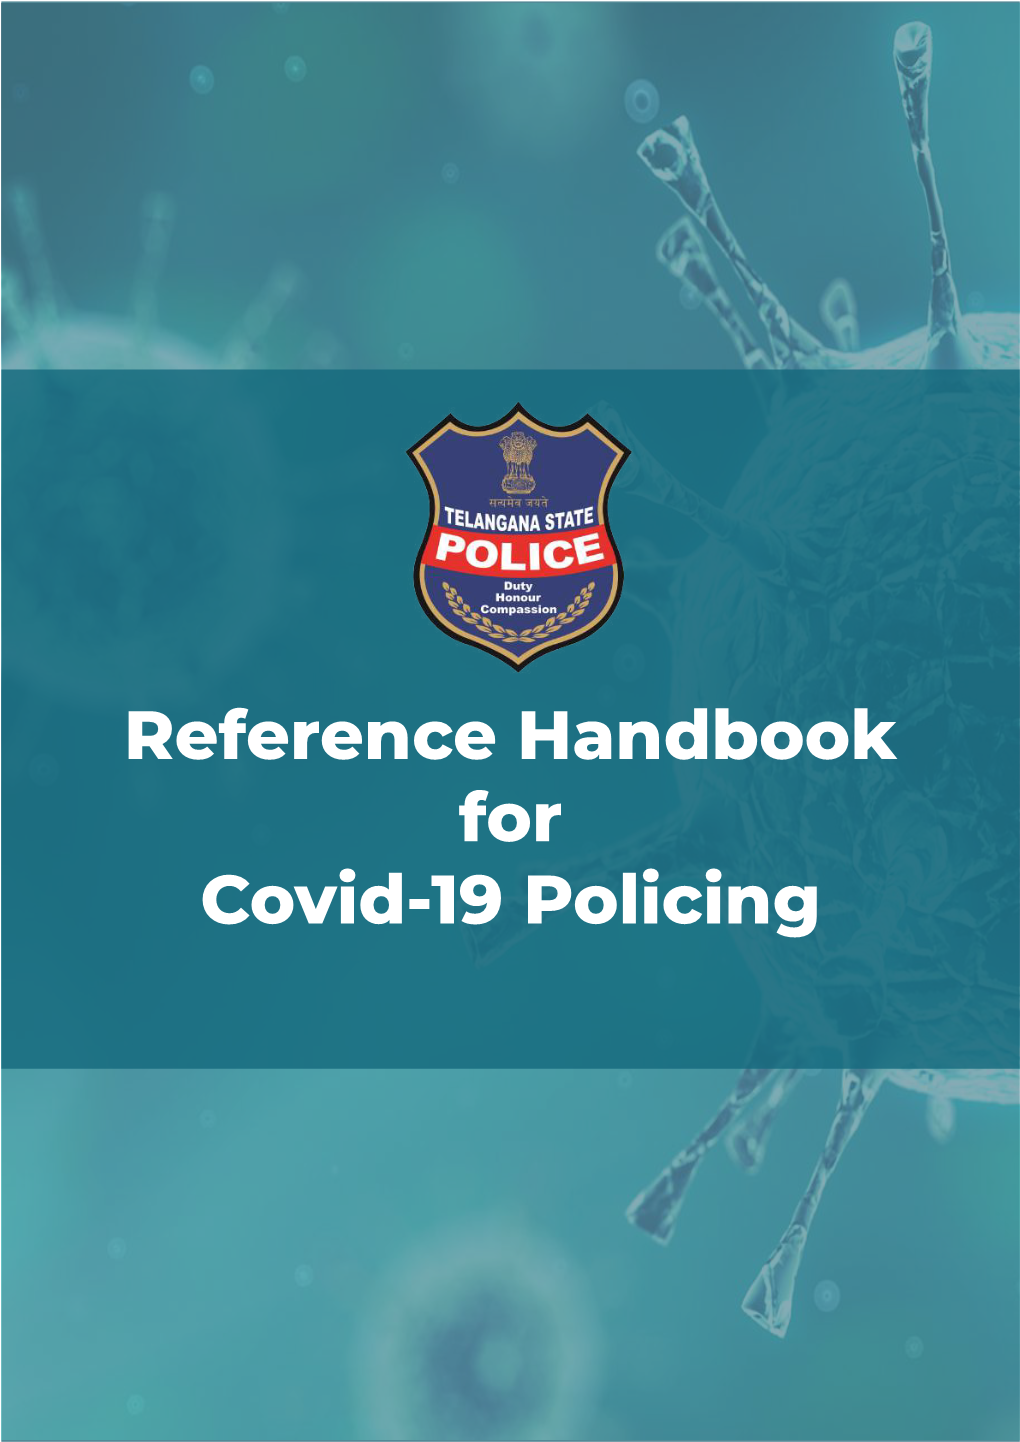 Reference Handbook for Covid-19 Policing Date: 6Th June, 2020